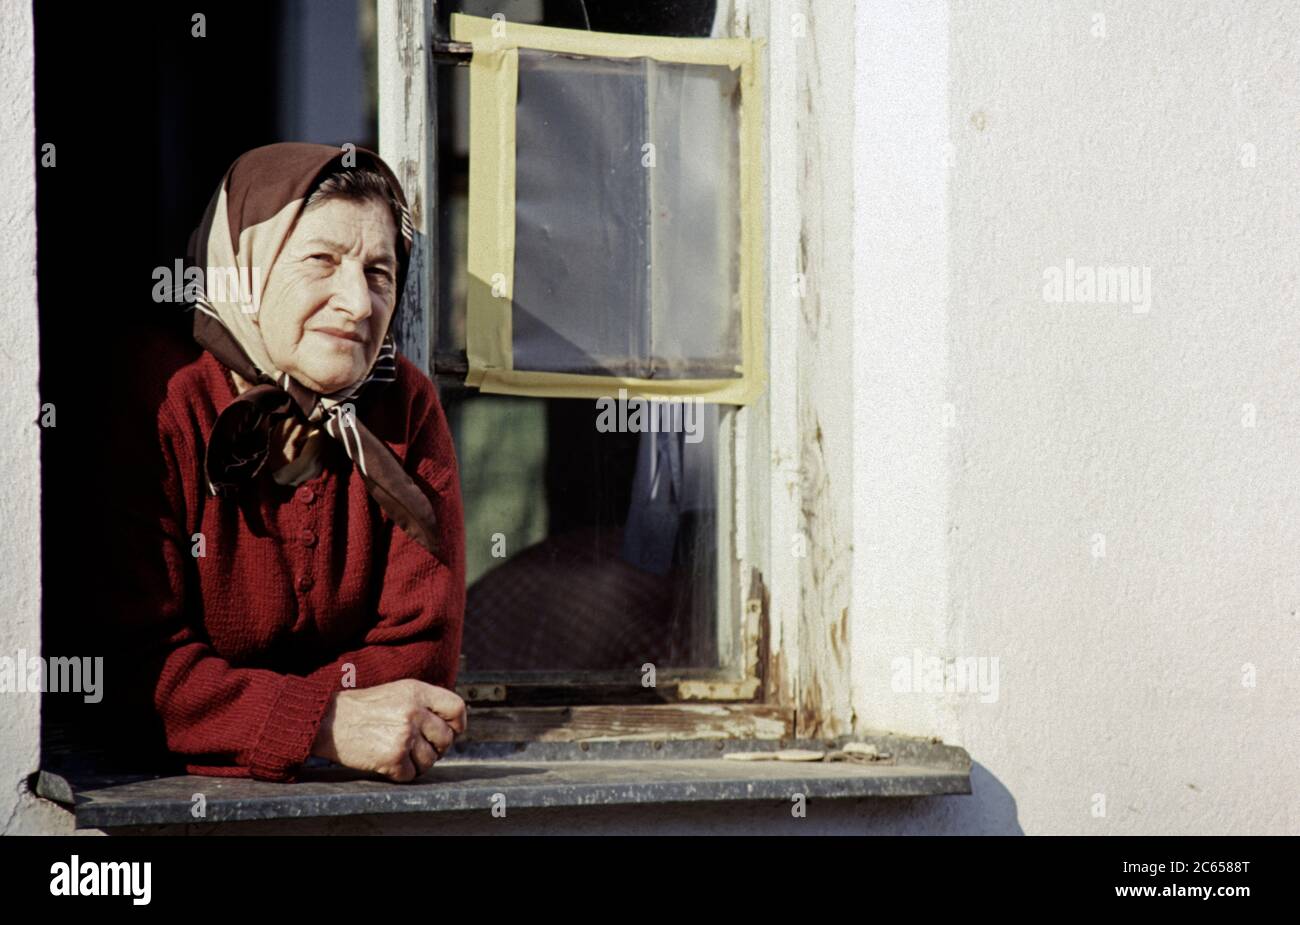 13th March 1994 During the war in Bosnia: a Bosnian Muslim woman inside the Muslim village of Rotilj, where everyone is under detention by the Bosnian Croats. Stock Photo